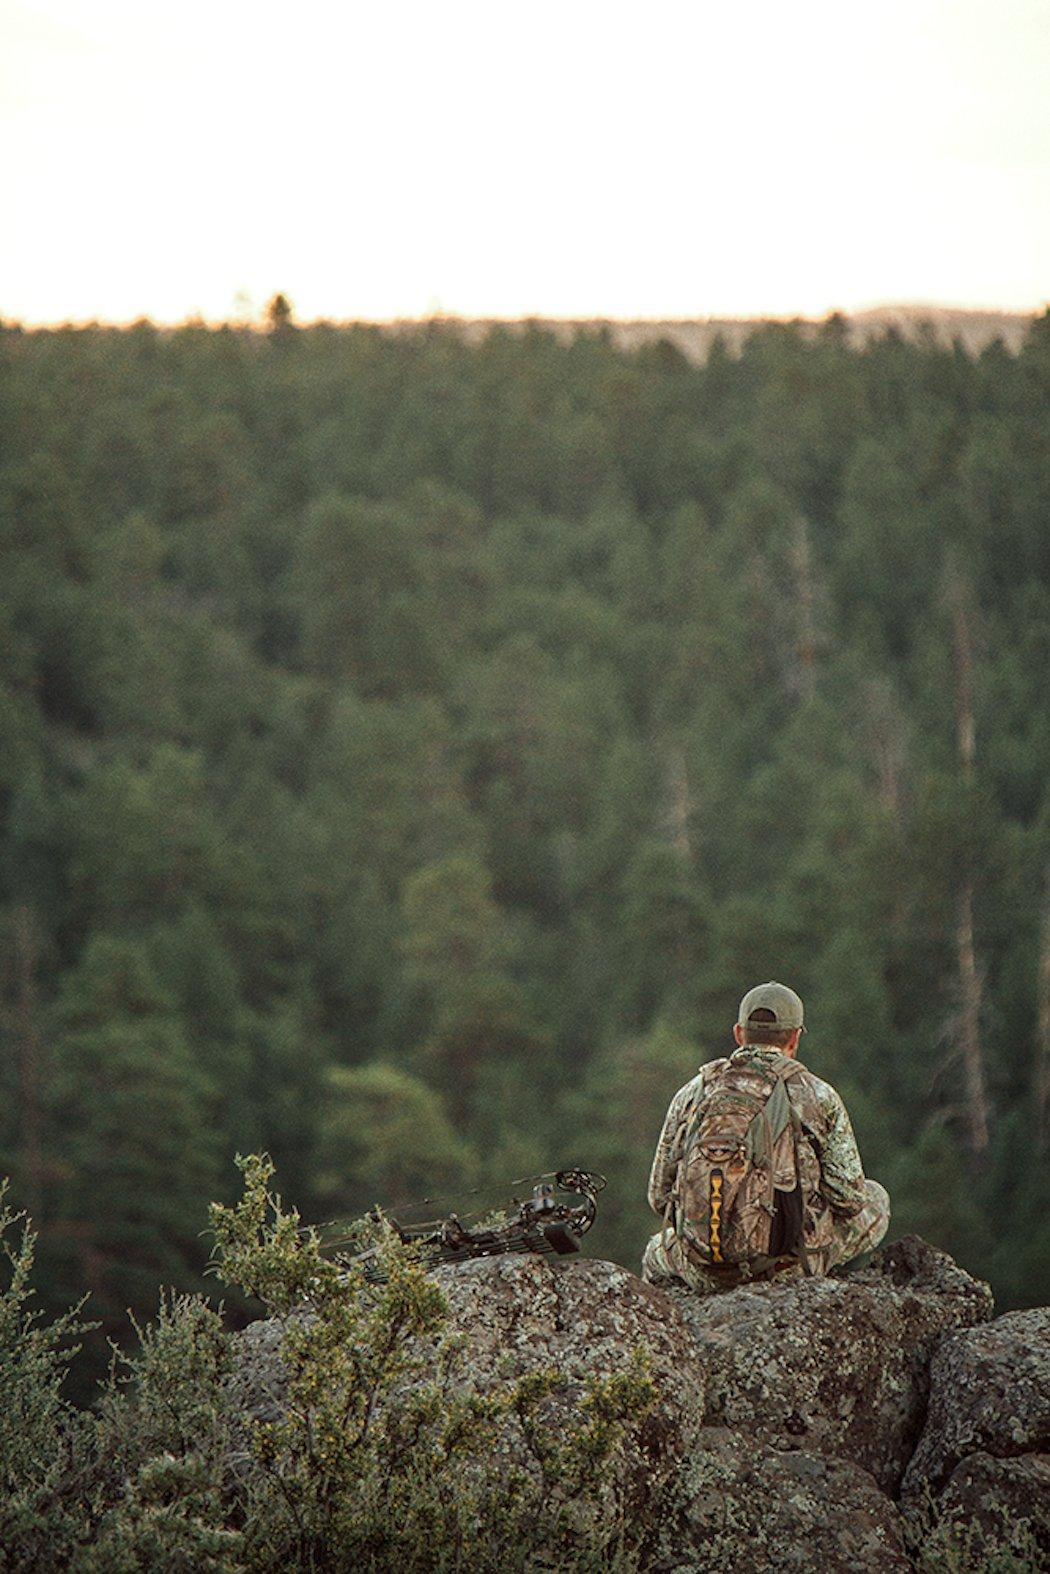 Your guide scouted the land. You haven't. Remember that. (Realtree/ Heartland Bowhunter photo)